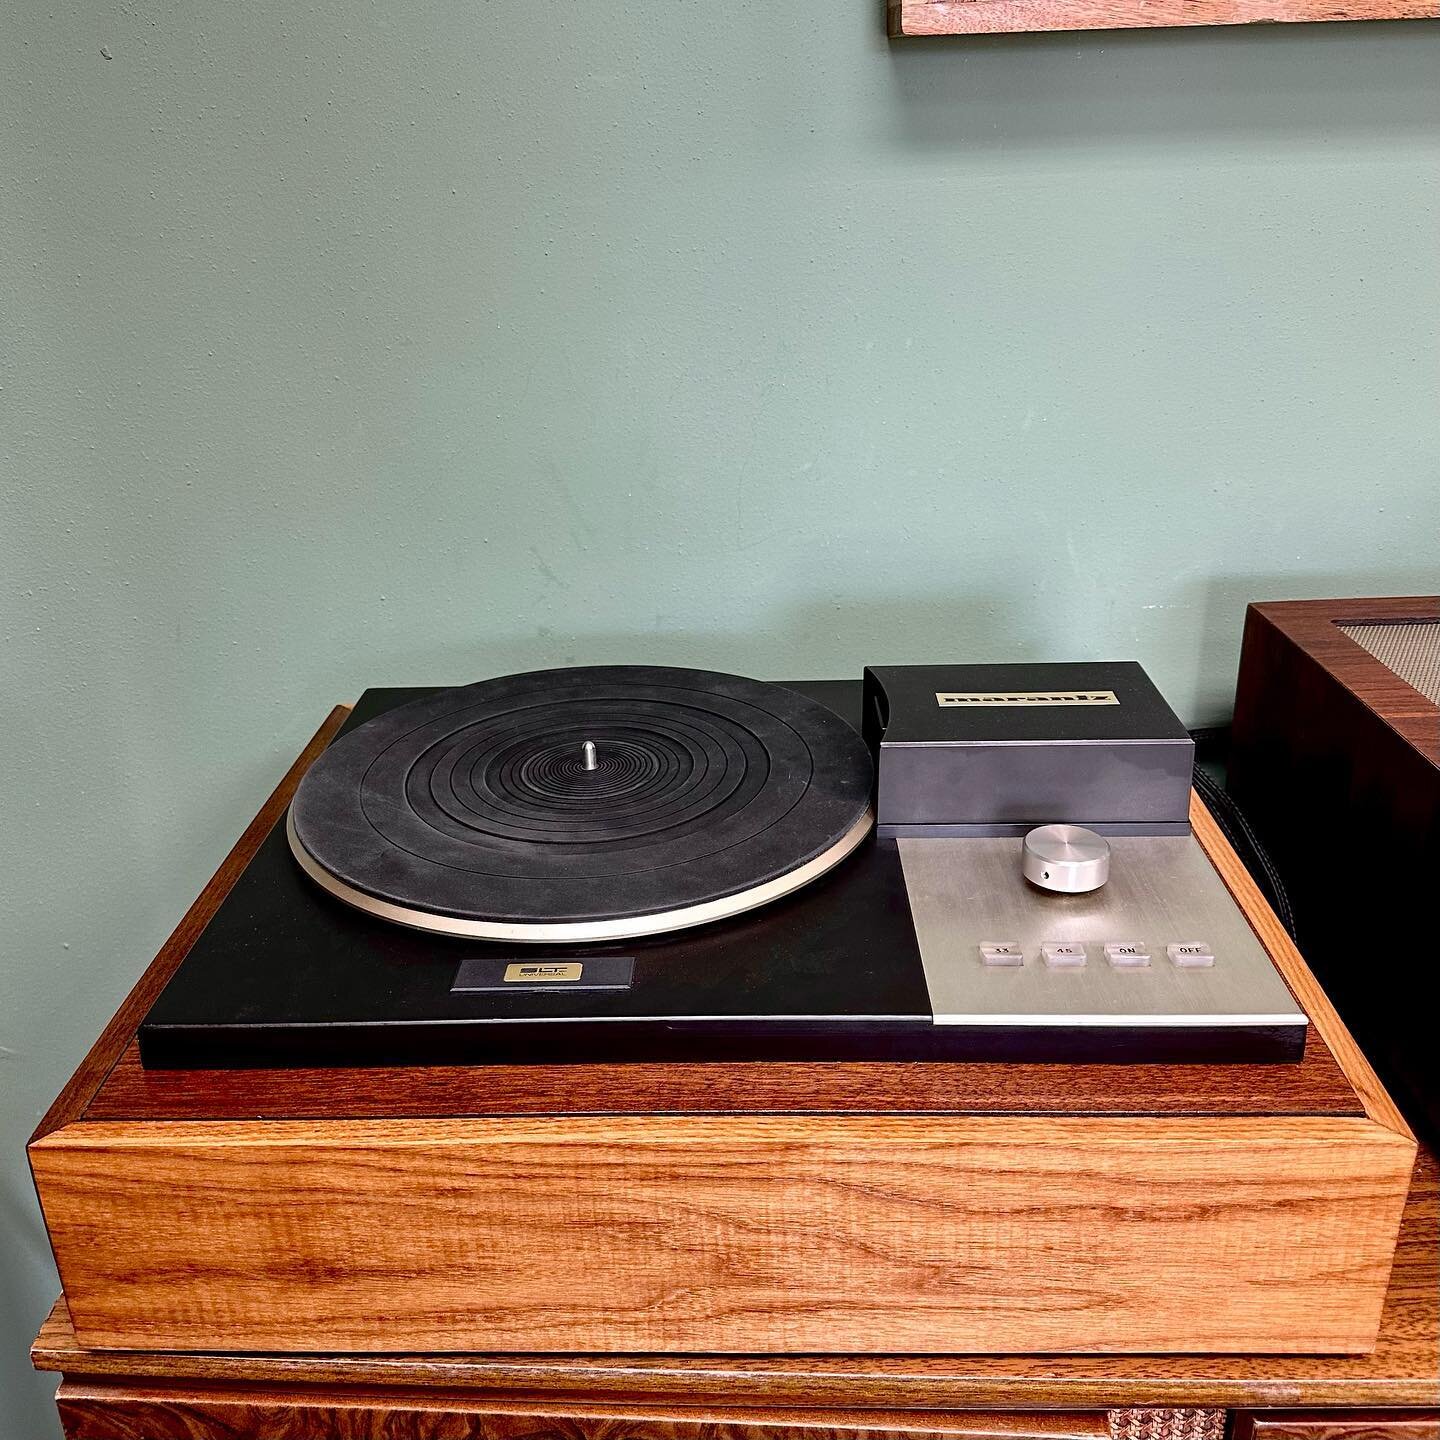 [AVAILABLE] Today we&rsquo;re featuring a rare turntable. Even dedicated Marantz enthusiasts may never have seen one of these in person. This is the SLT-12 Universal.
Marantz made this turntable in the early &lsquo;60s and it&rsquo;s said that the de